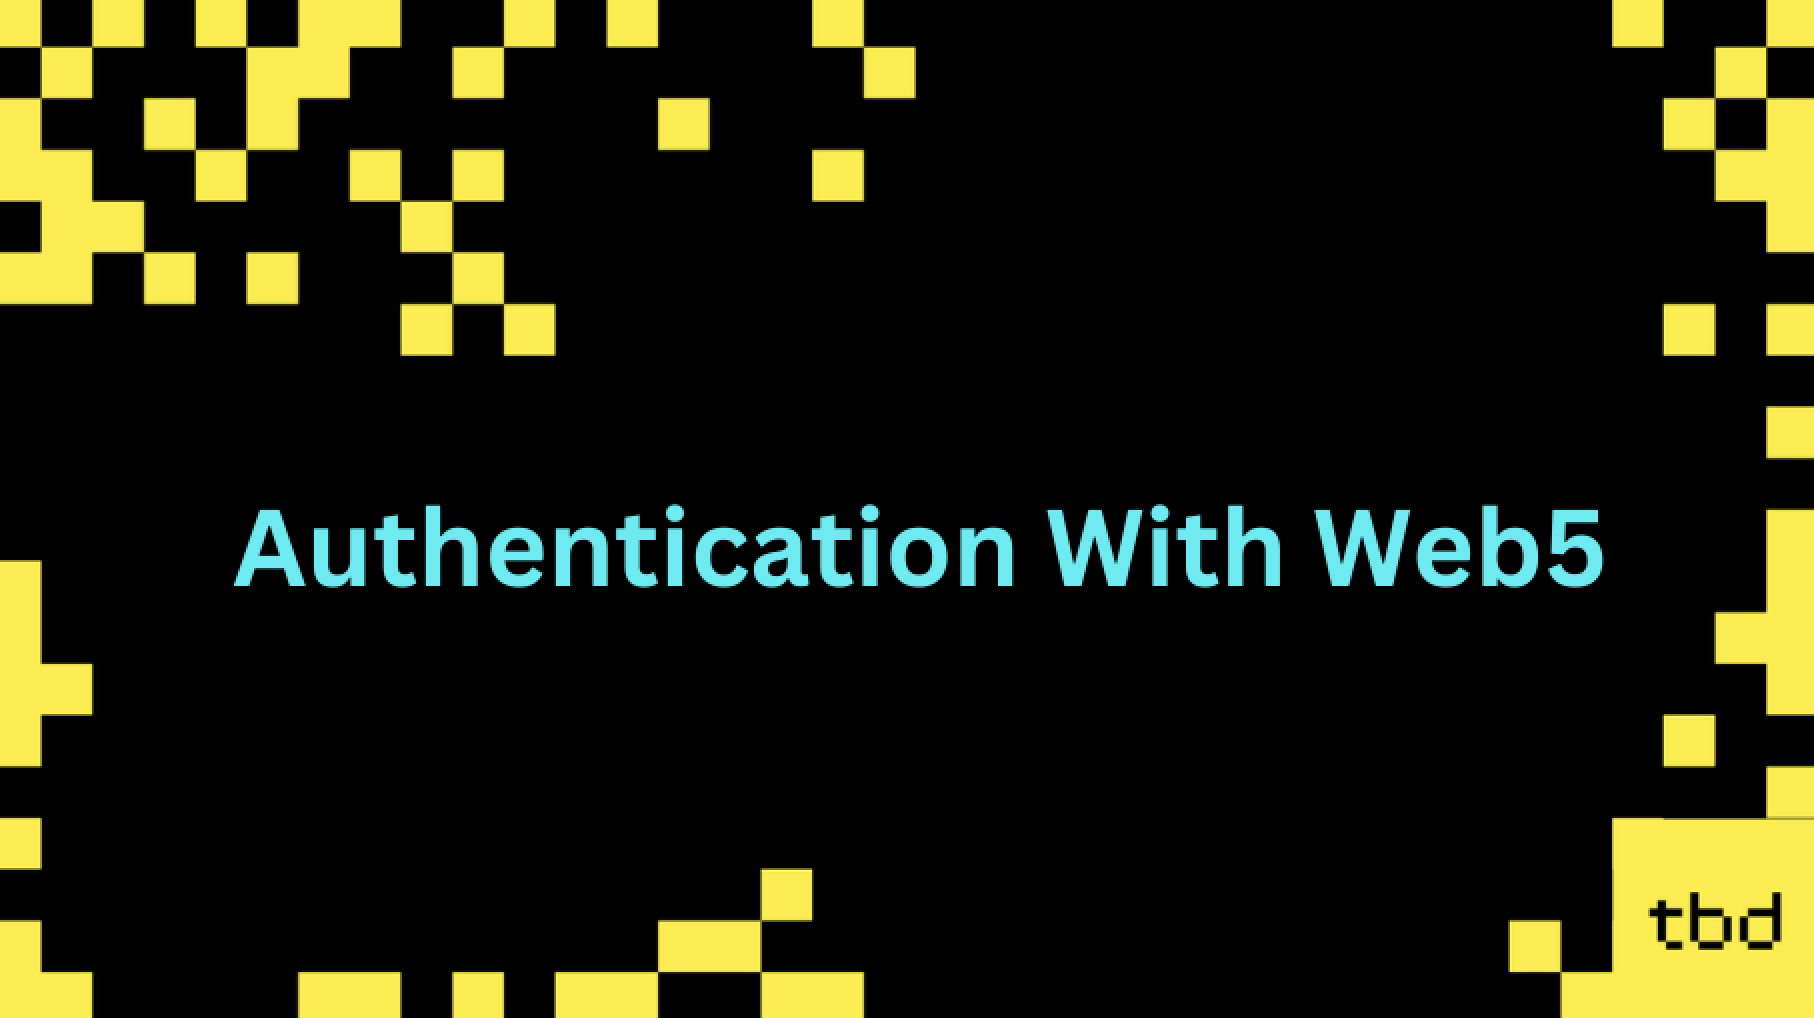 Authentication With Web5